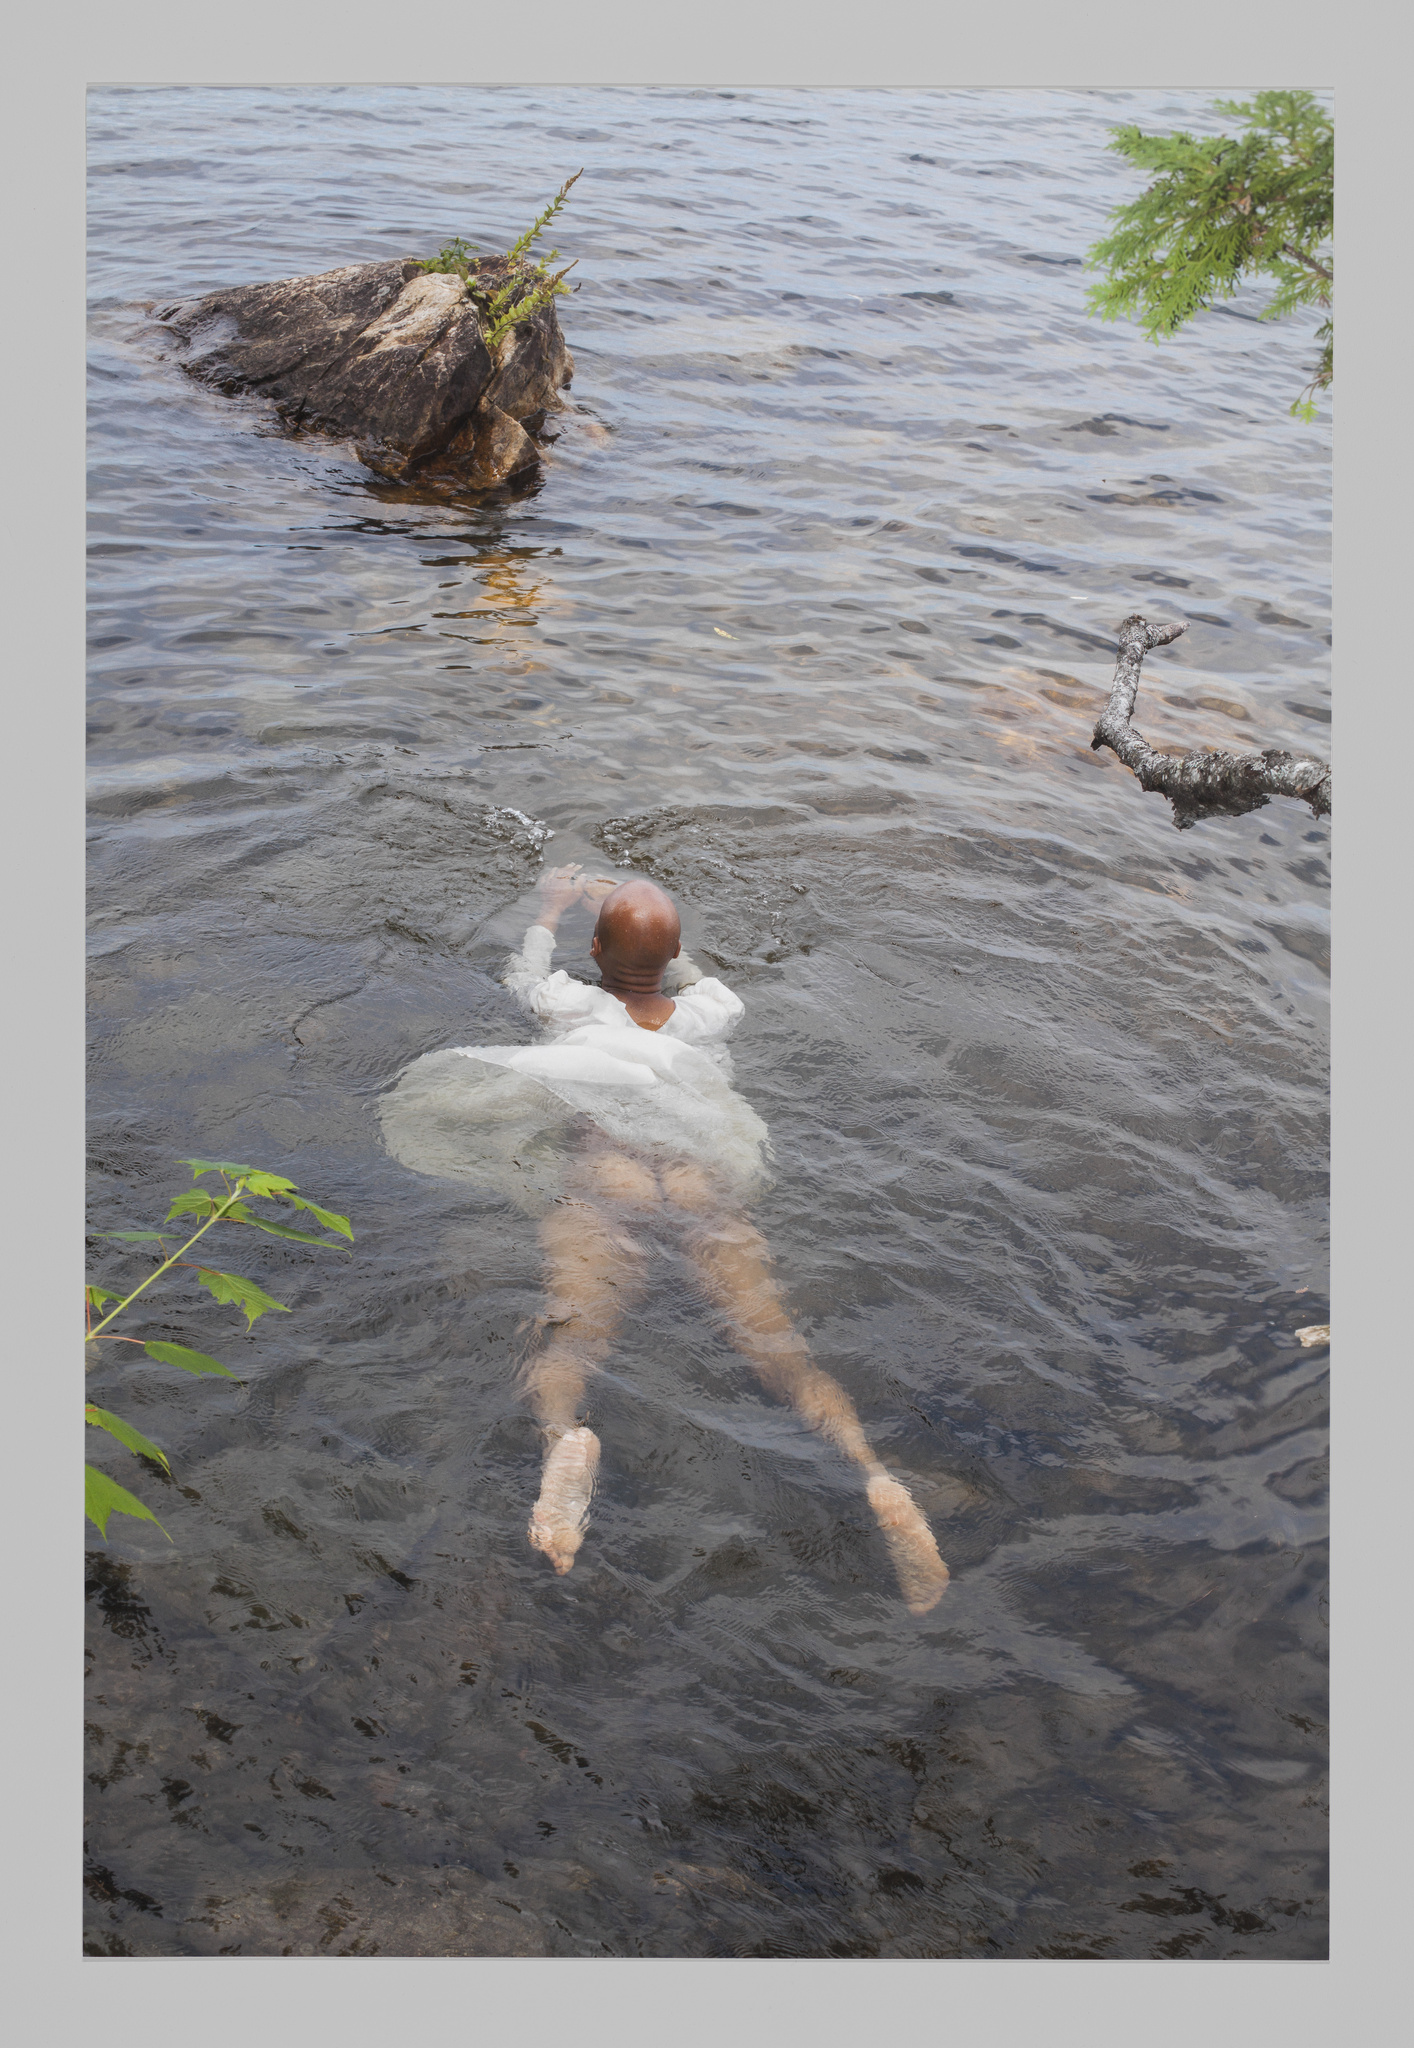 A figure swims out into rippling water, with their dress floating up to reveal their bare bottom and legs